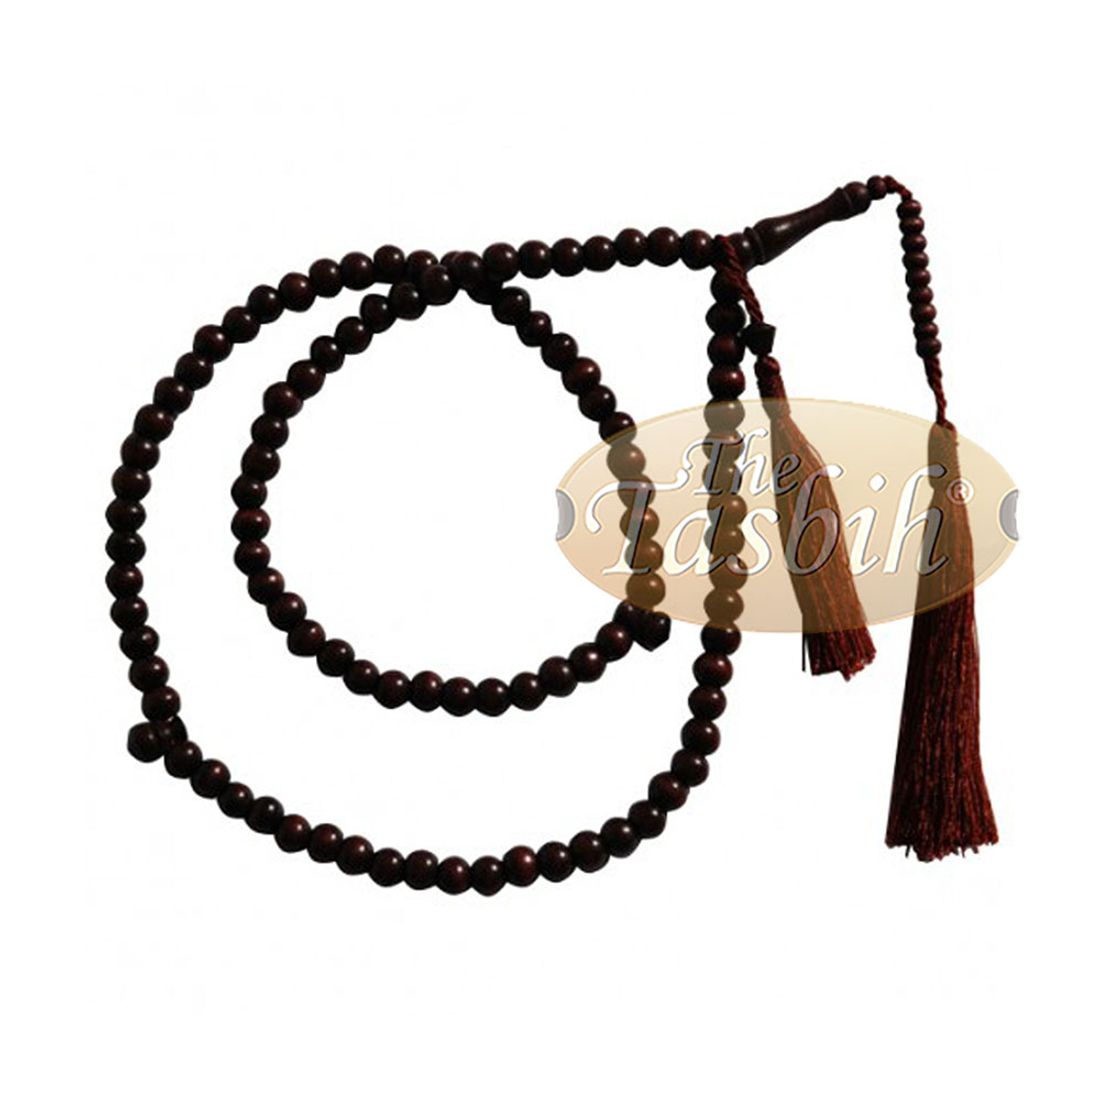 8mm Maroon-colored Citrus Wood Tasbih with Matching Tassels